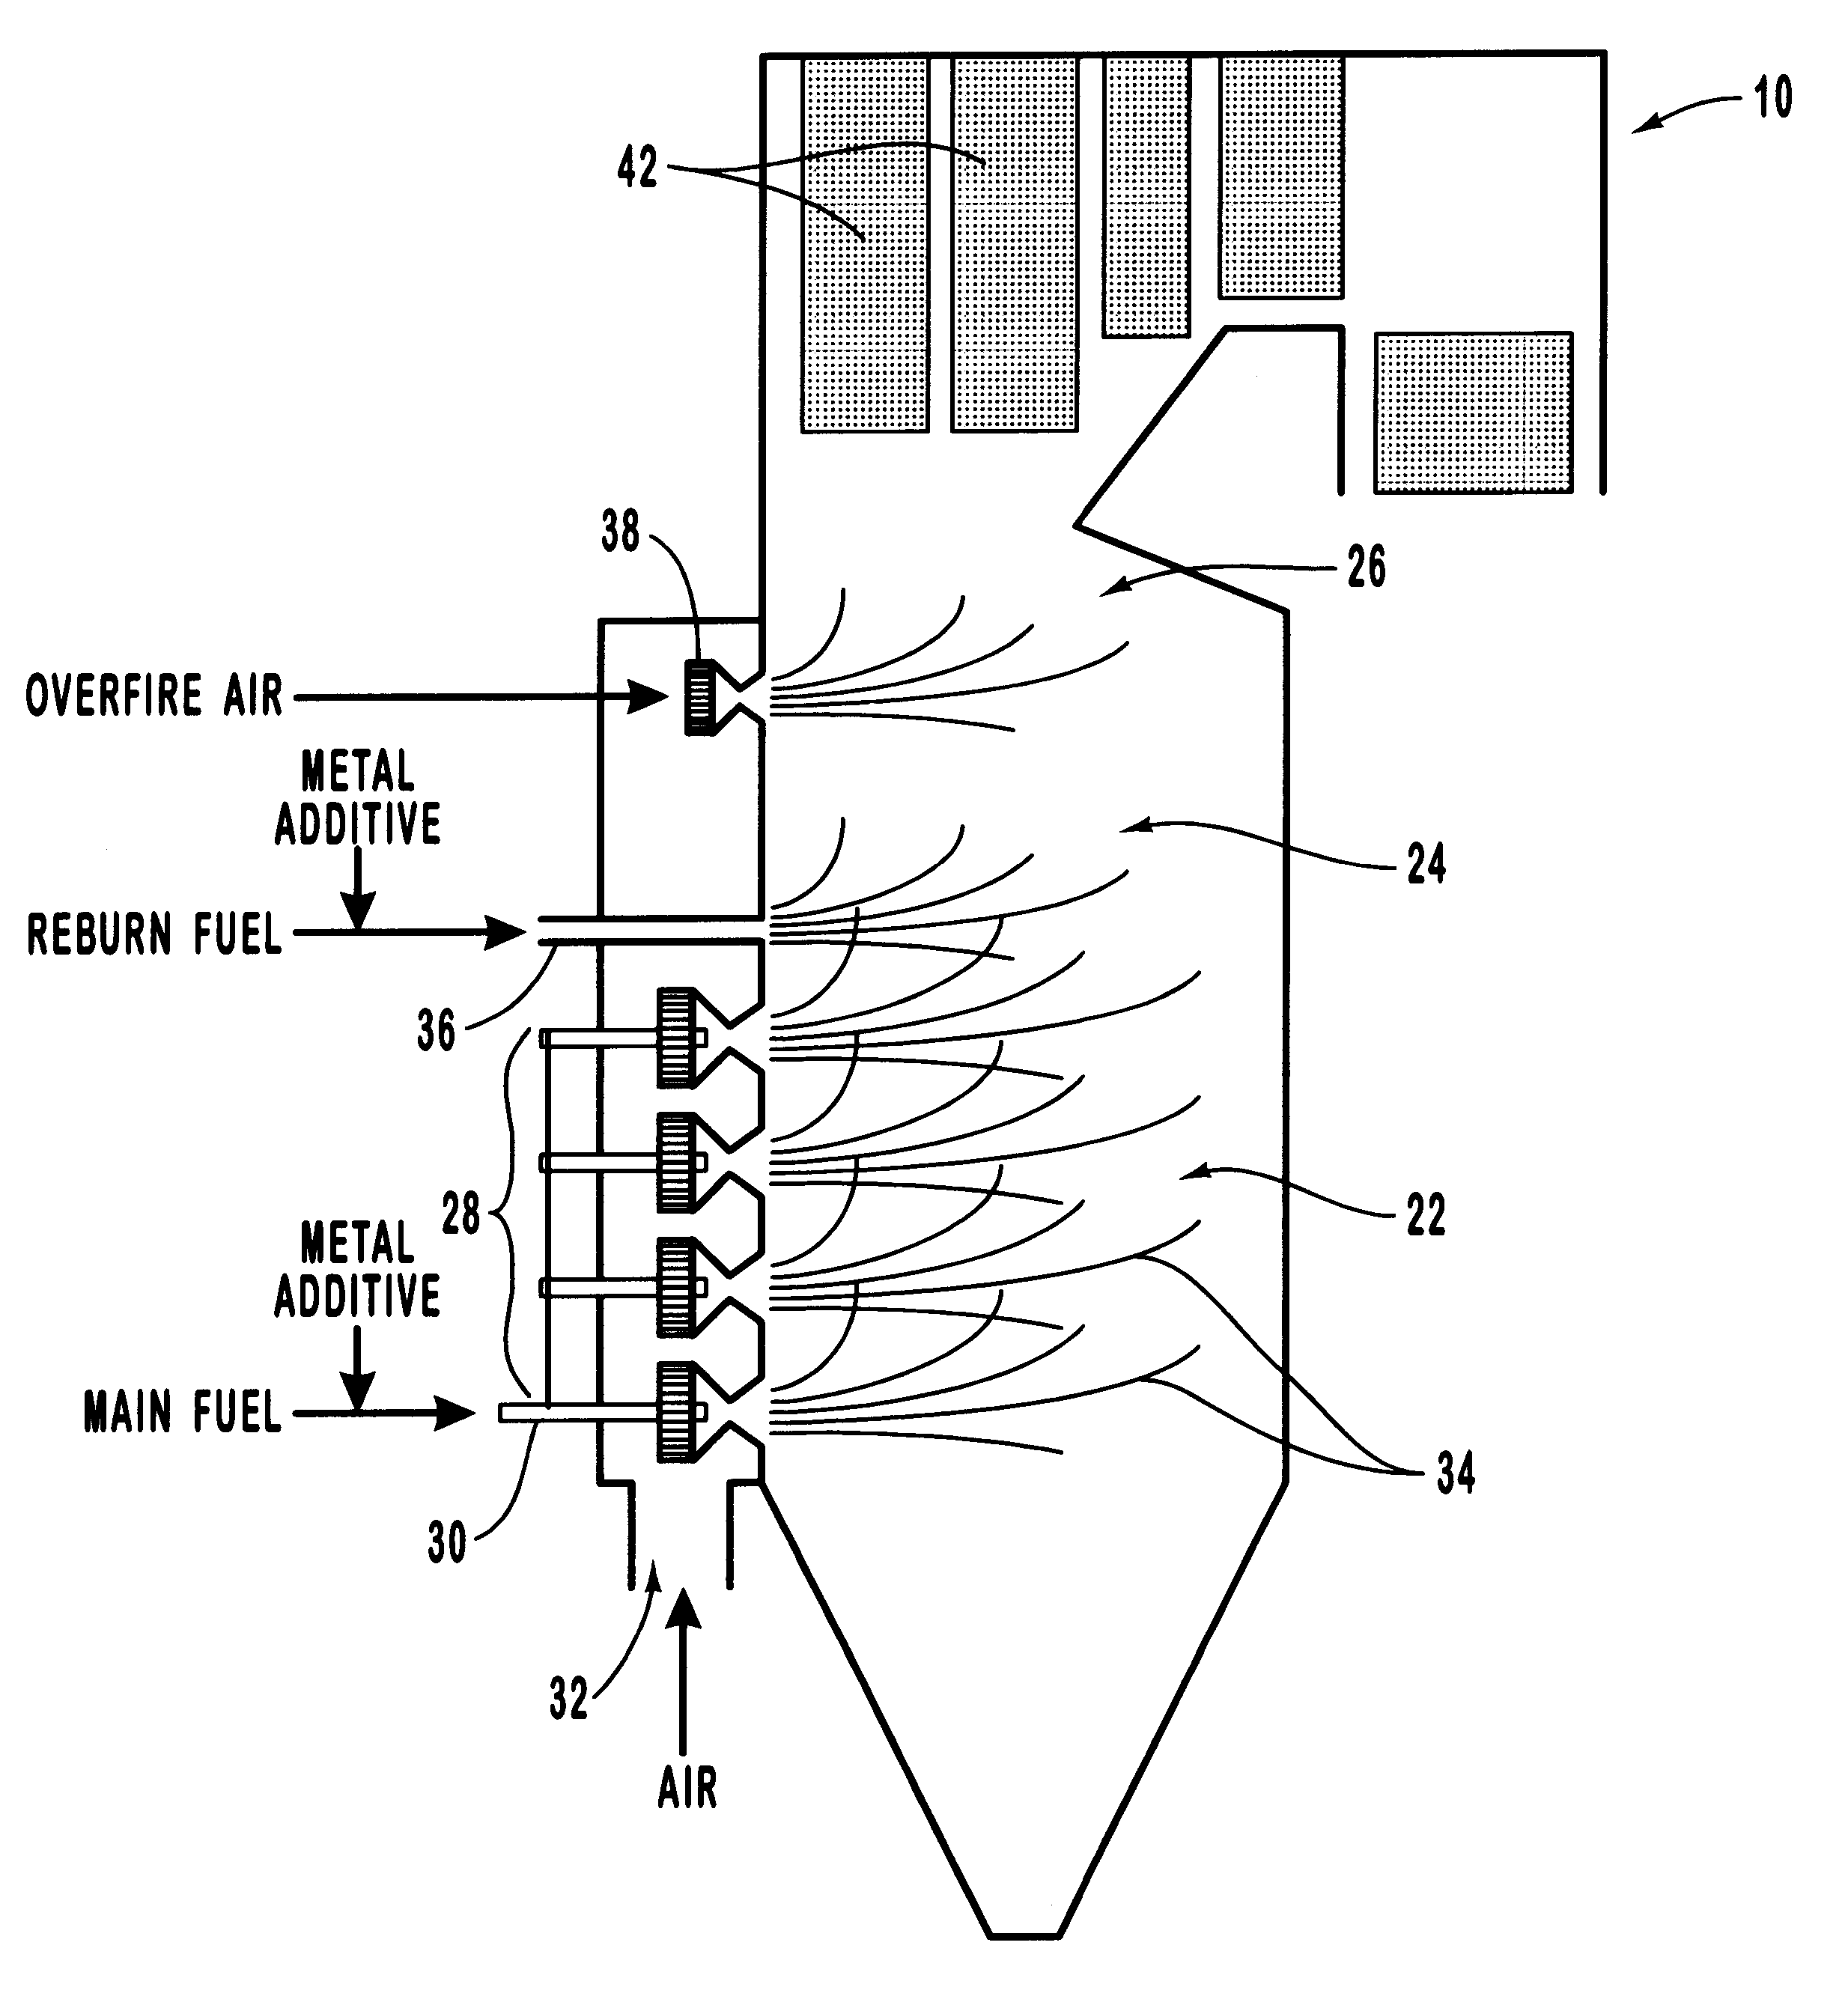 Method for reducing NOX in combustion flue gas using metal-containing additives